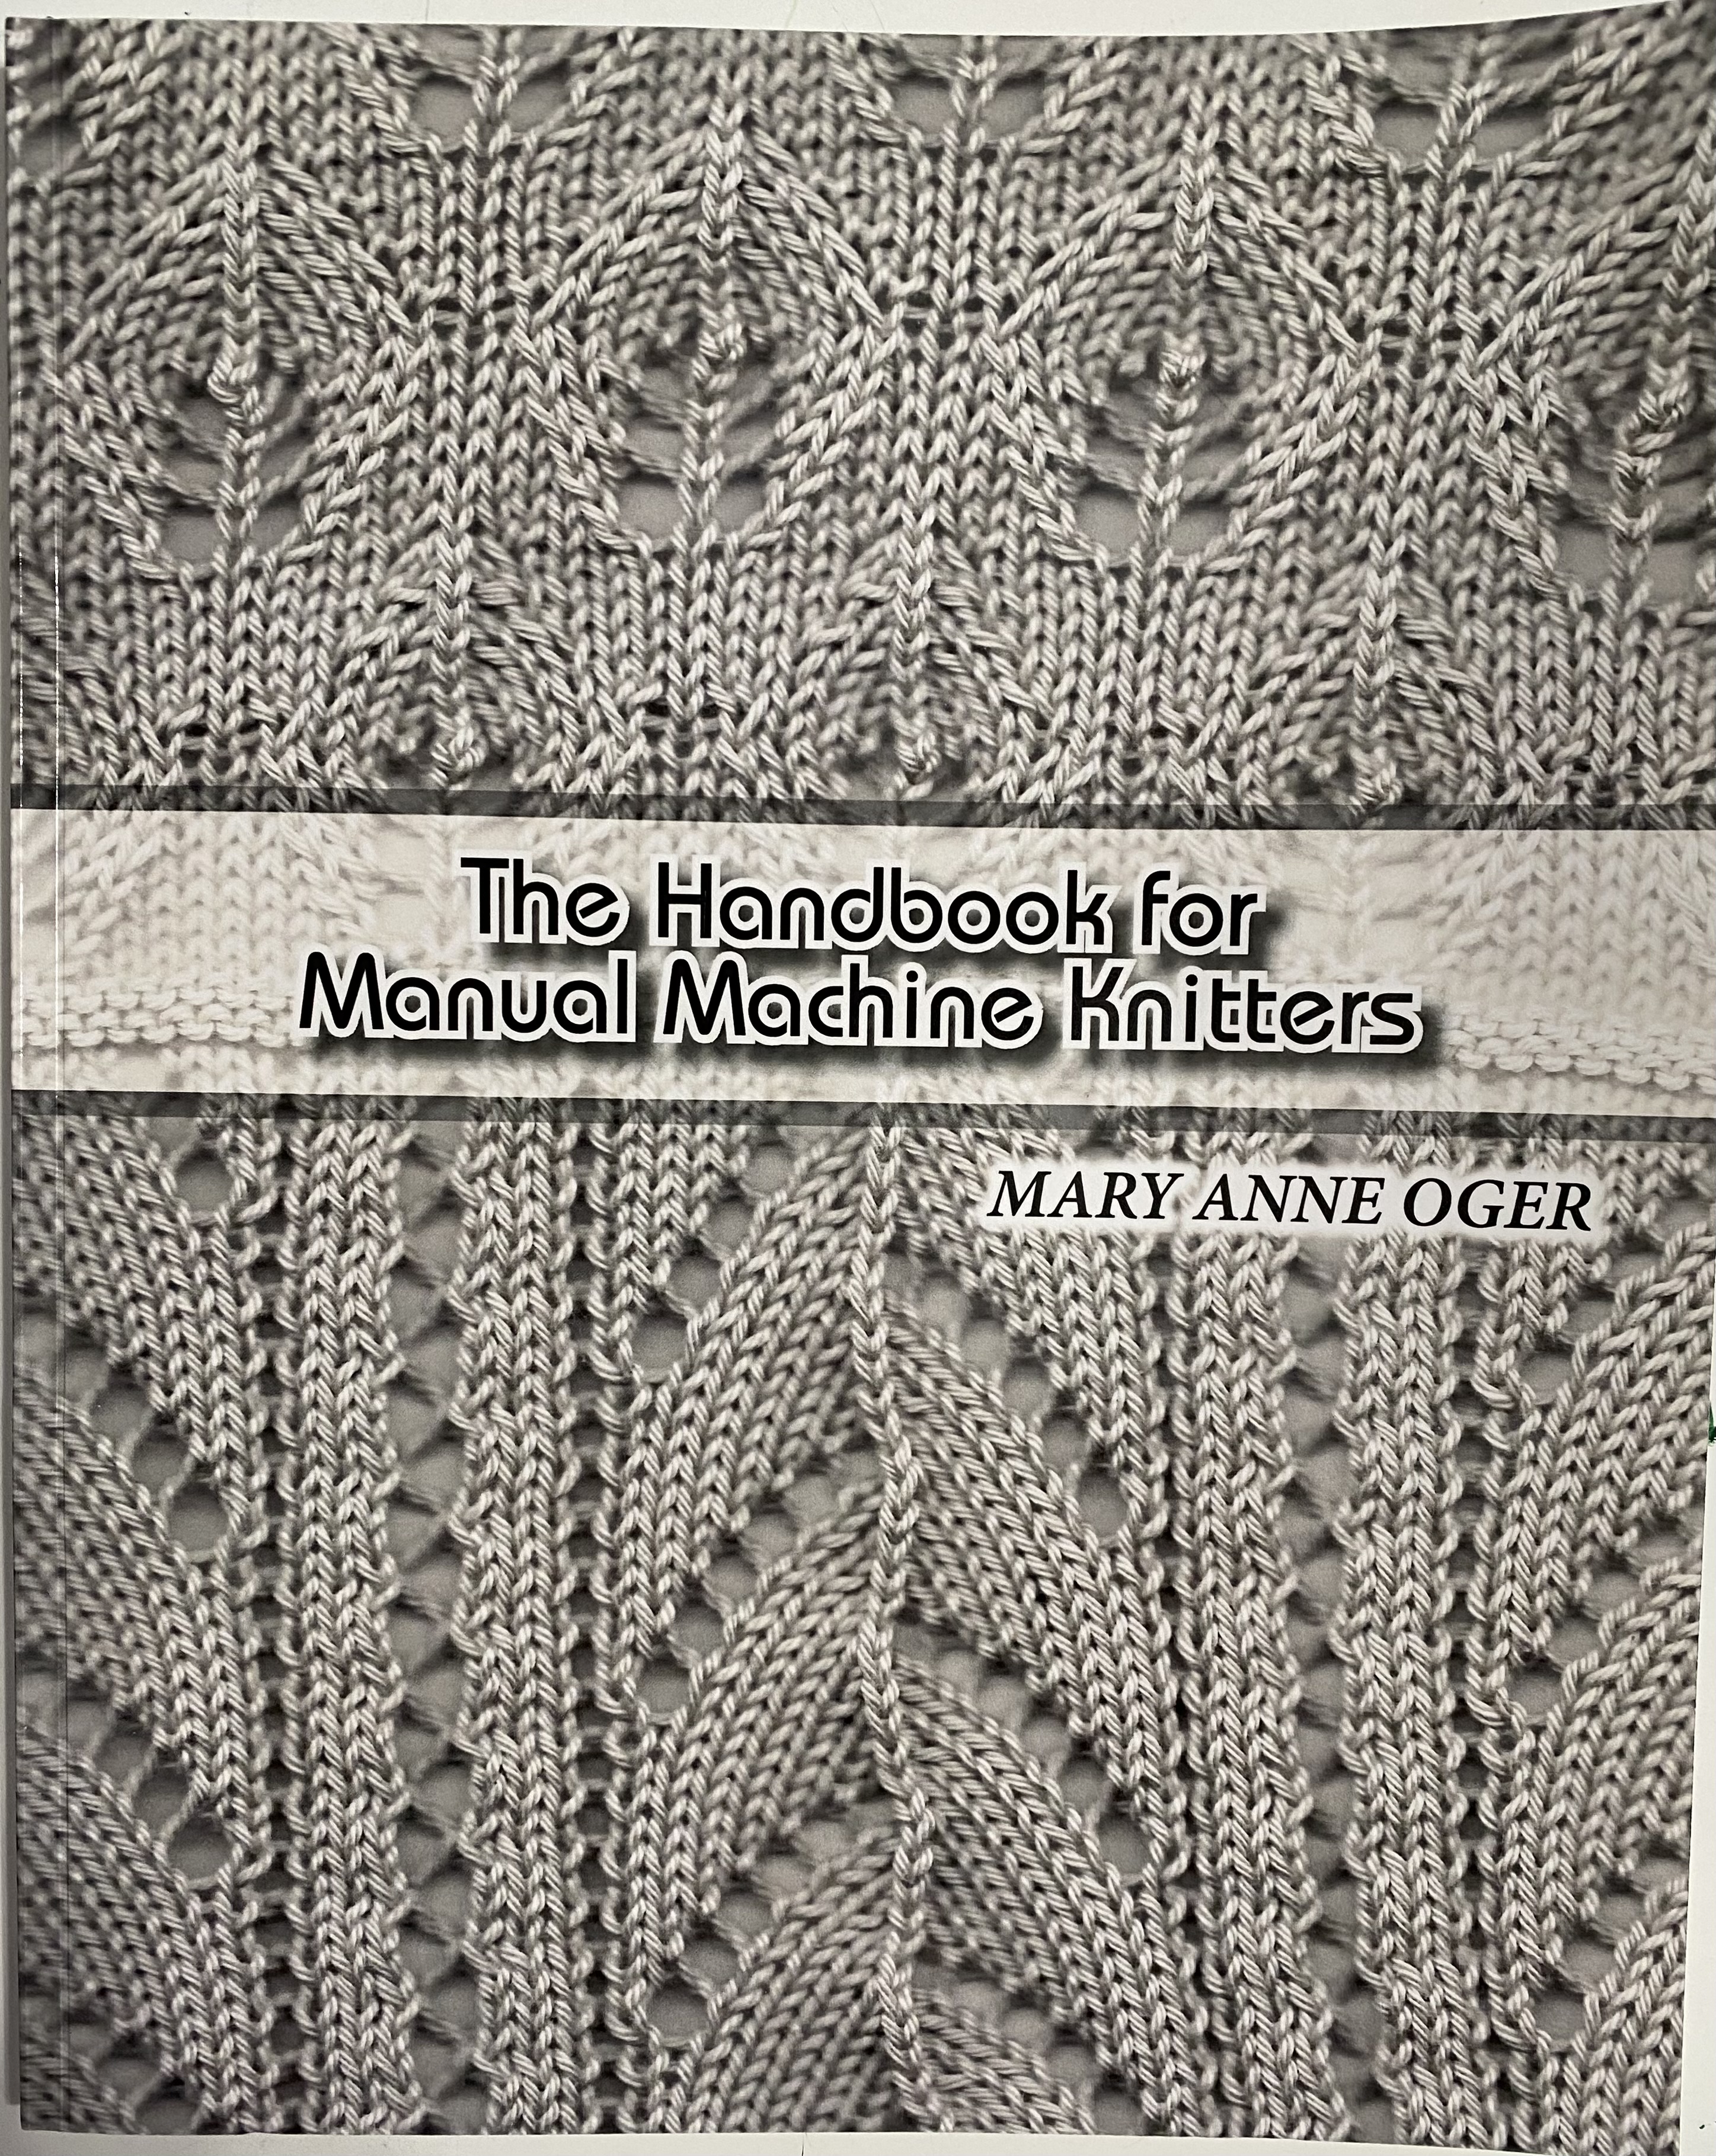 The Handbook for Manual Machine Knitters